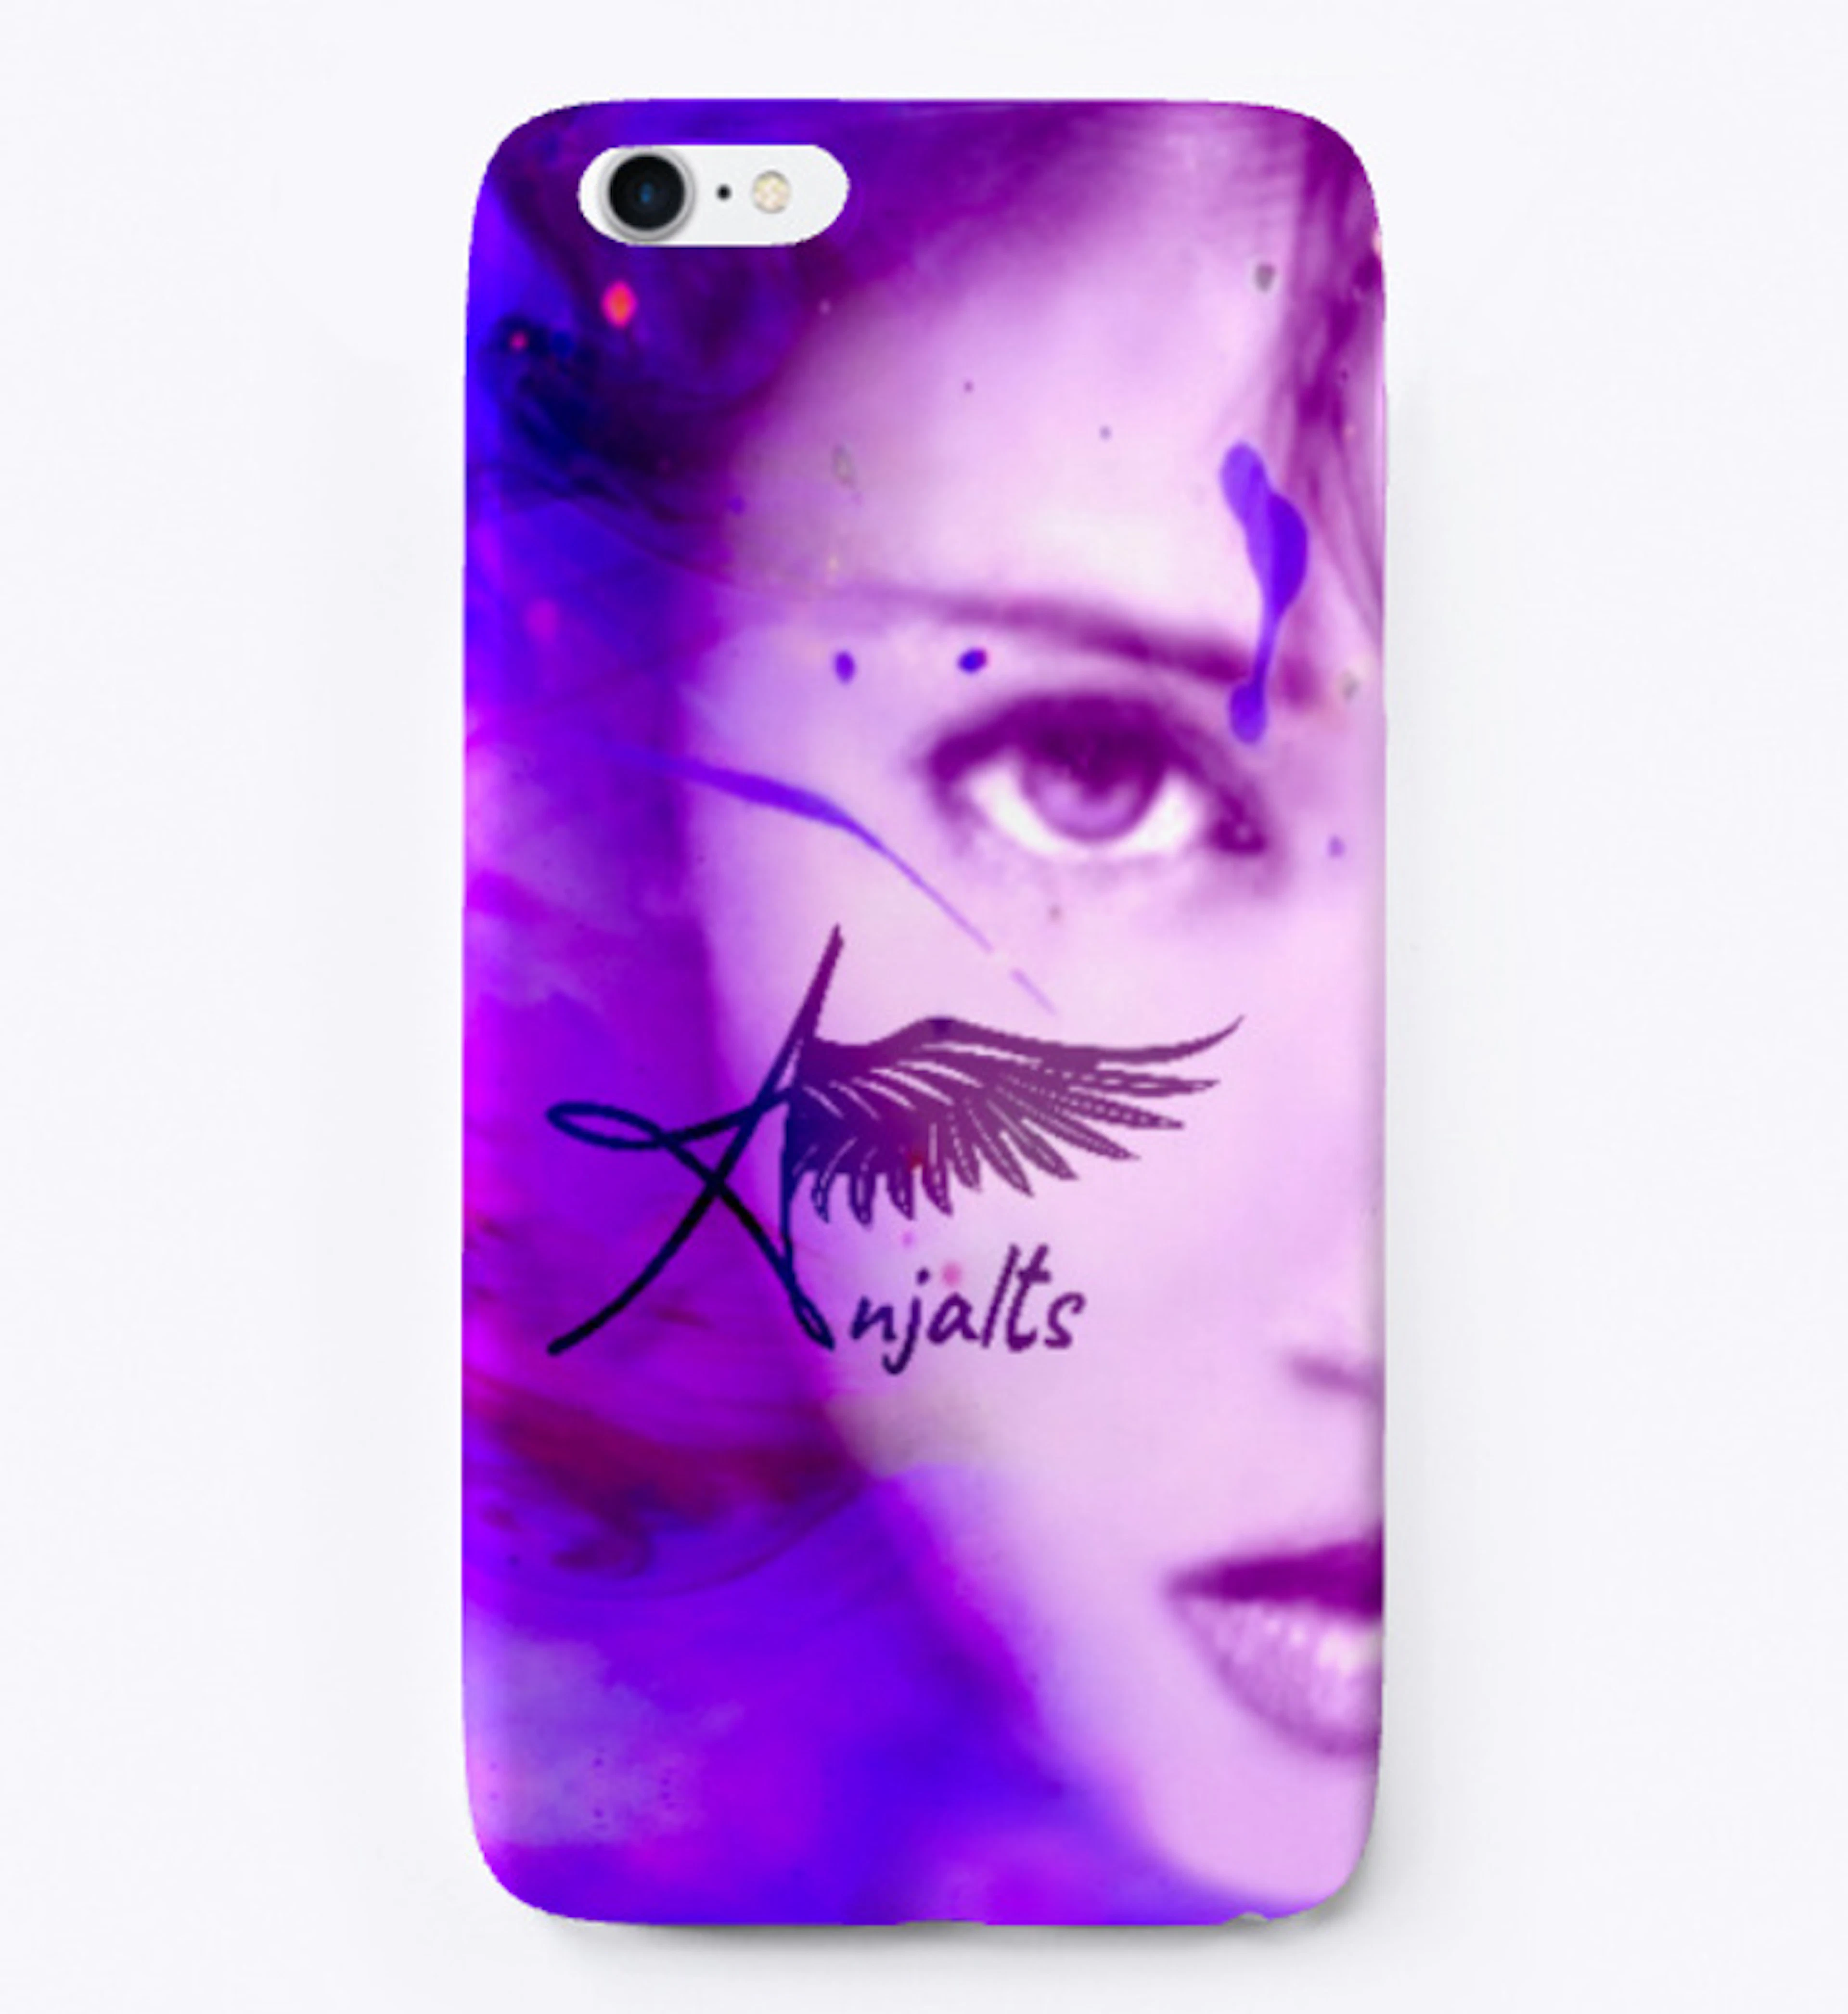 Anjalts iPhone Case Cover